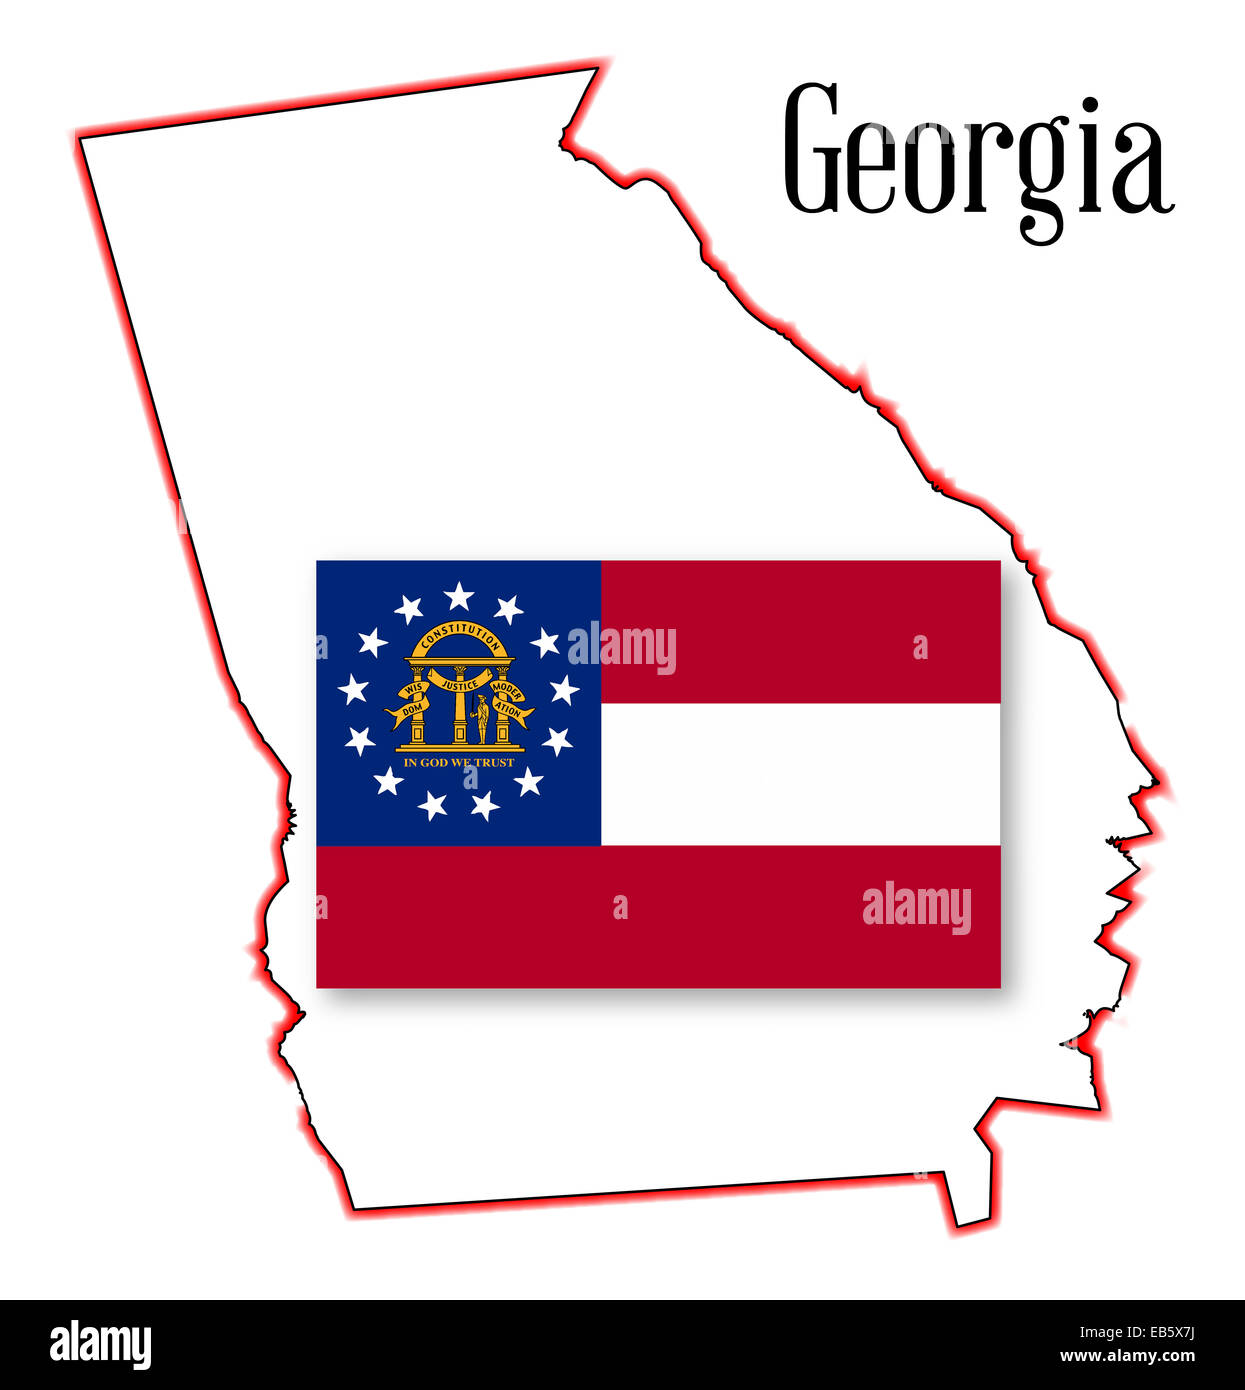 State map outline of Georgia over a white background with map inset Stock Photo